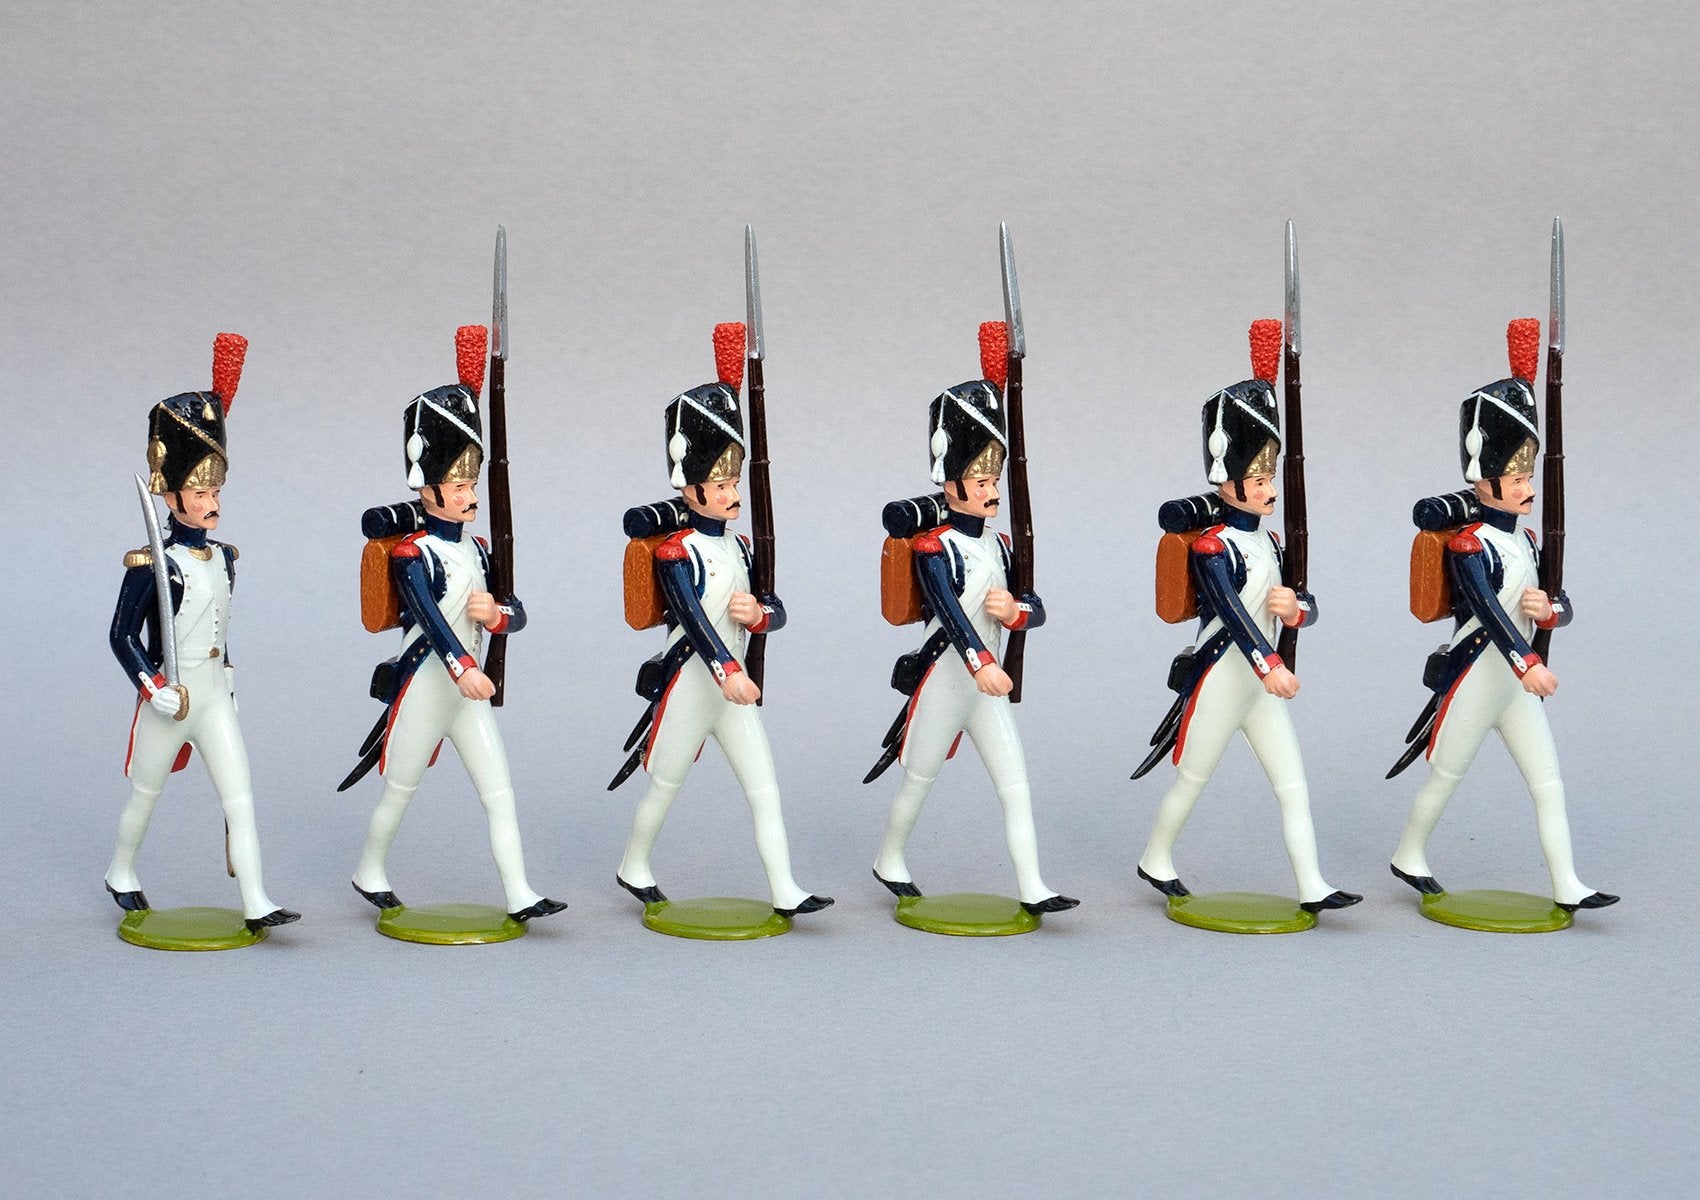 Set 107 Grenadiers à Pied | French Infantry | Napoleonic Wars | One officer with sword, five men marching | Waterloo | © Imperial Productions | Sculpt by David Cowe